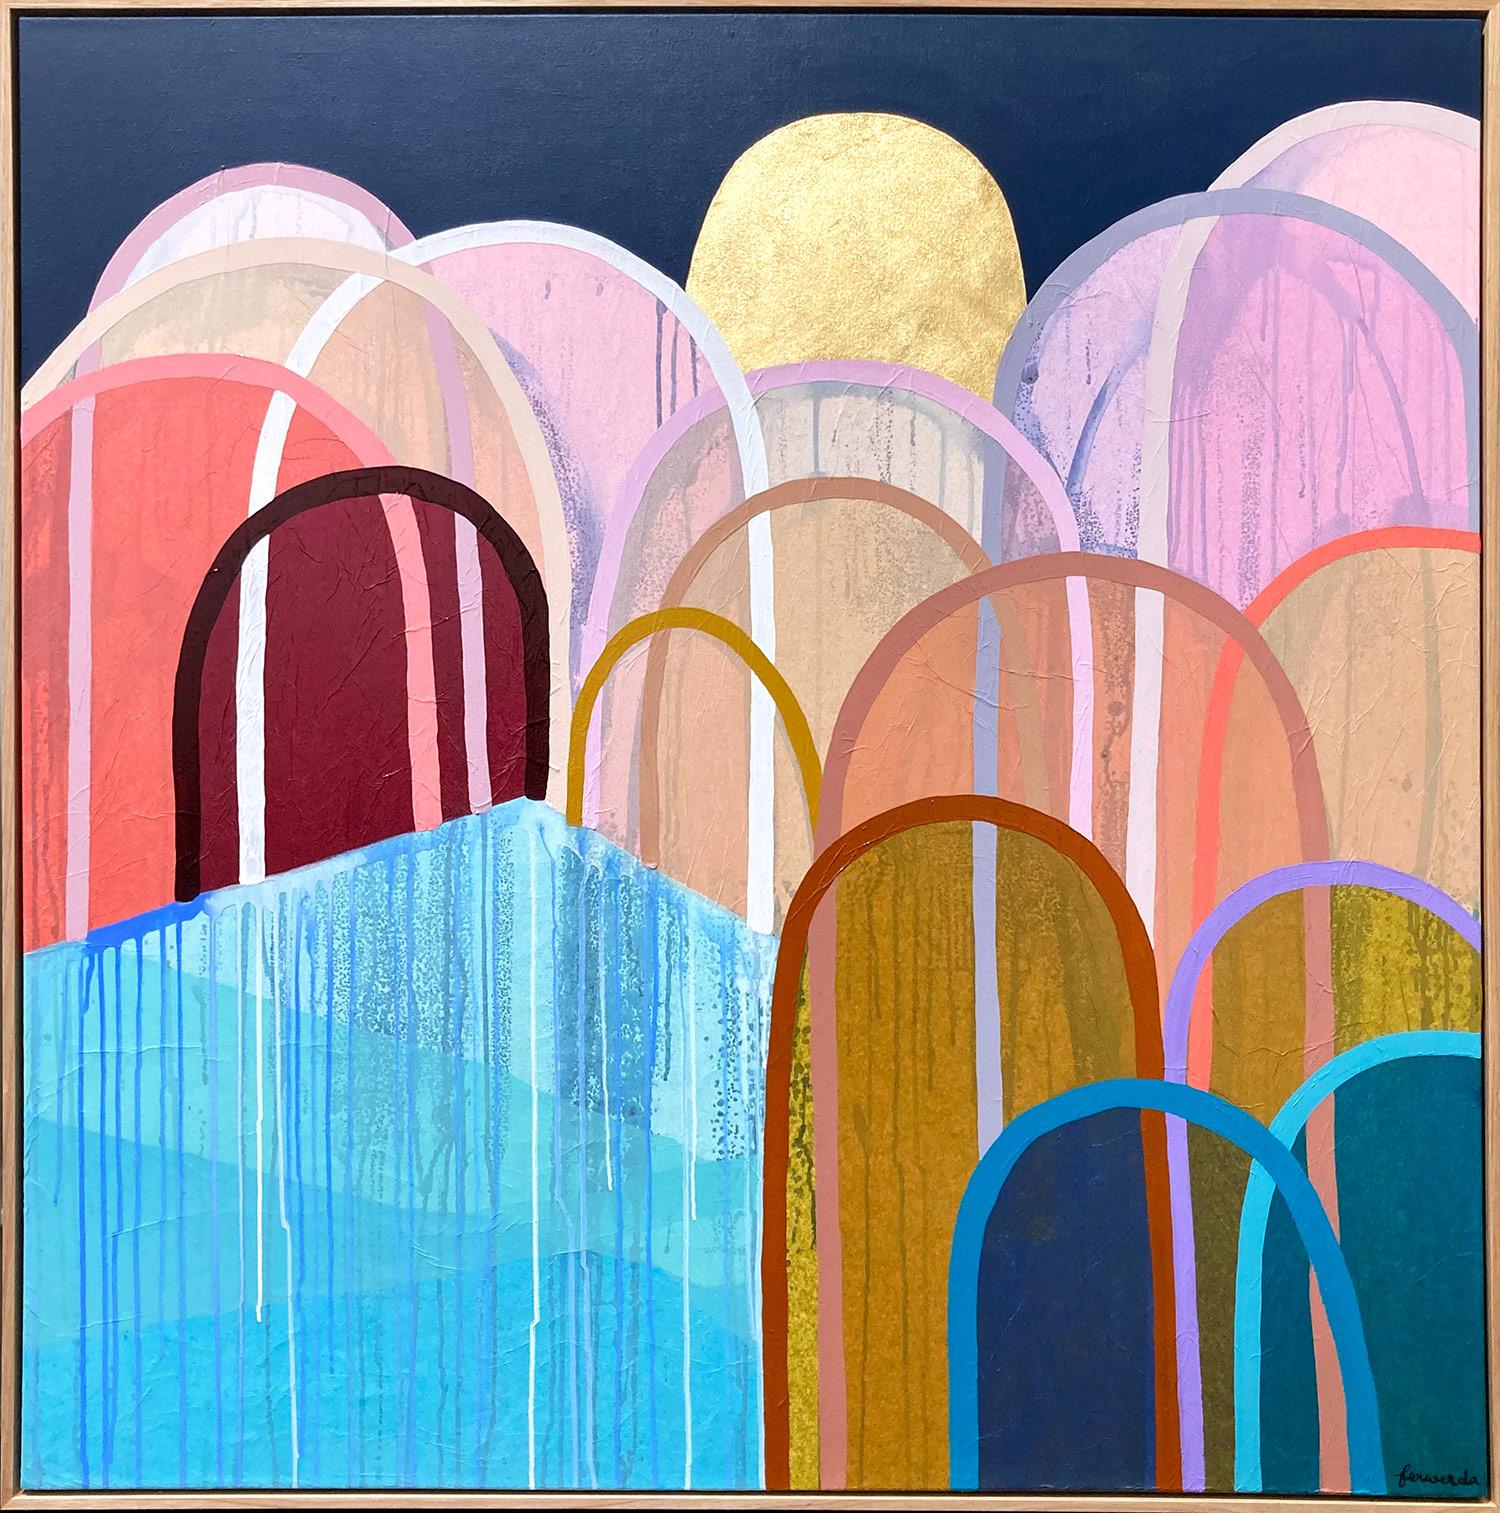 Antoinette Ferwerda Abstract Painting - "Curl Curl Beach Hills" Colorful Contemporary Mixed Media Painting on Canvas